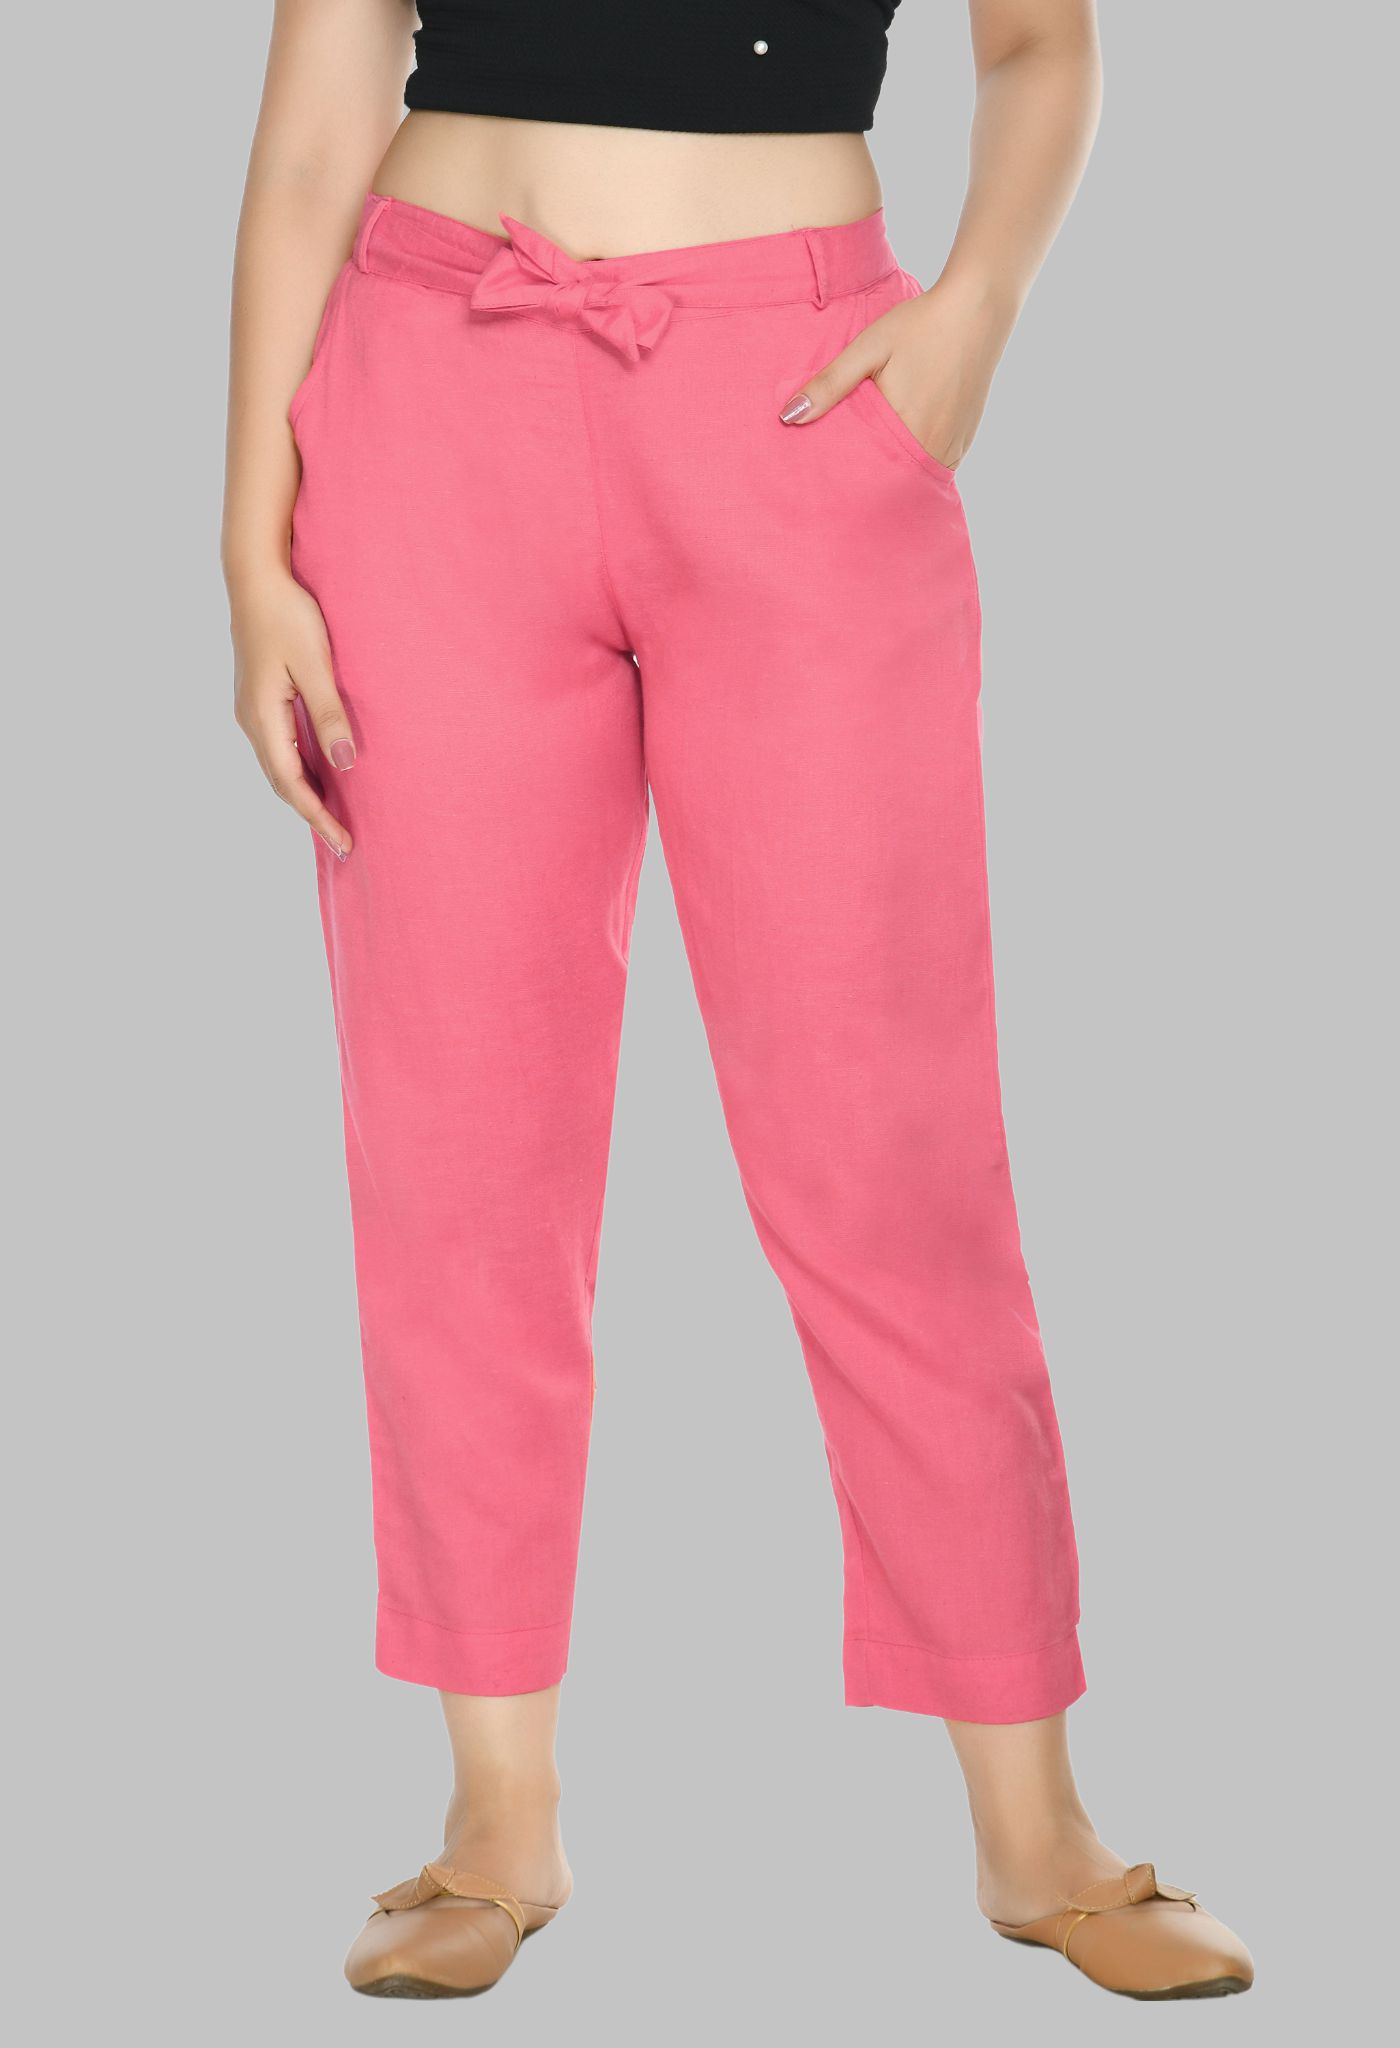     			PREEGO - Pink Rayon Regular Women's Casual Pants ( Pack of 1 )